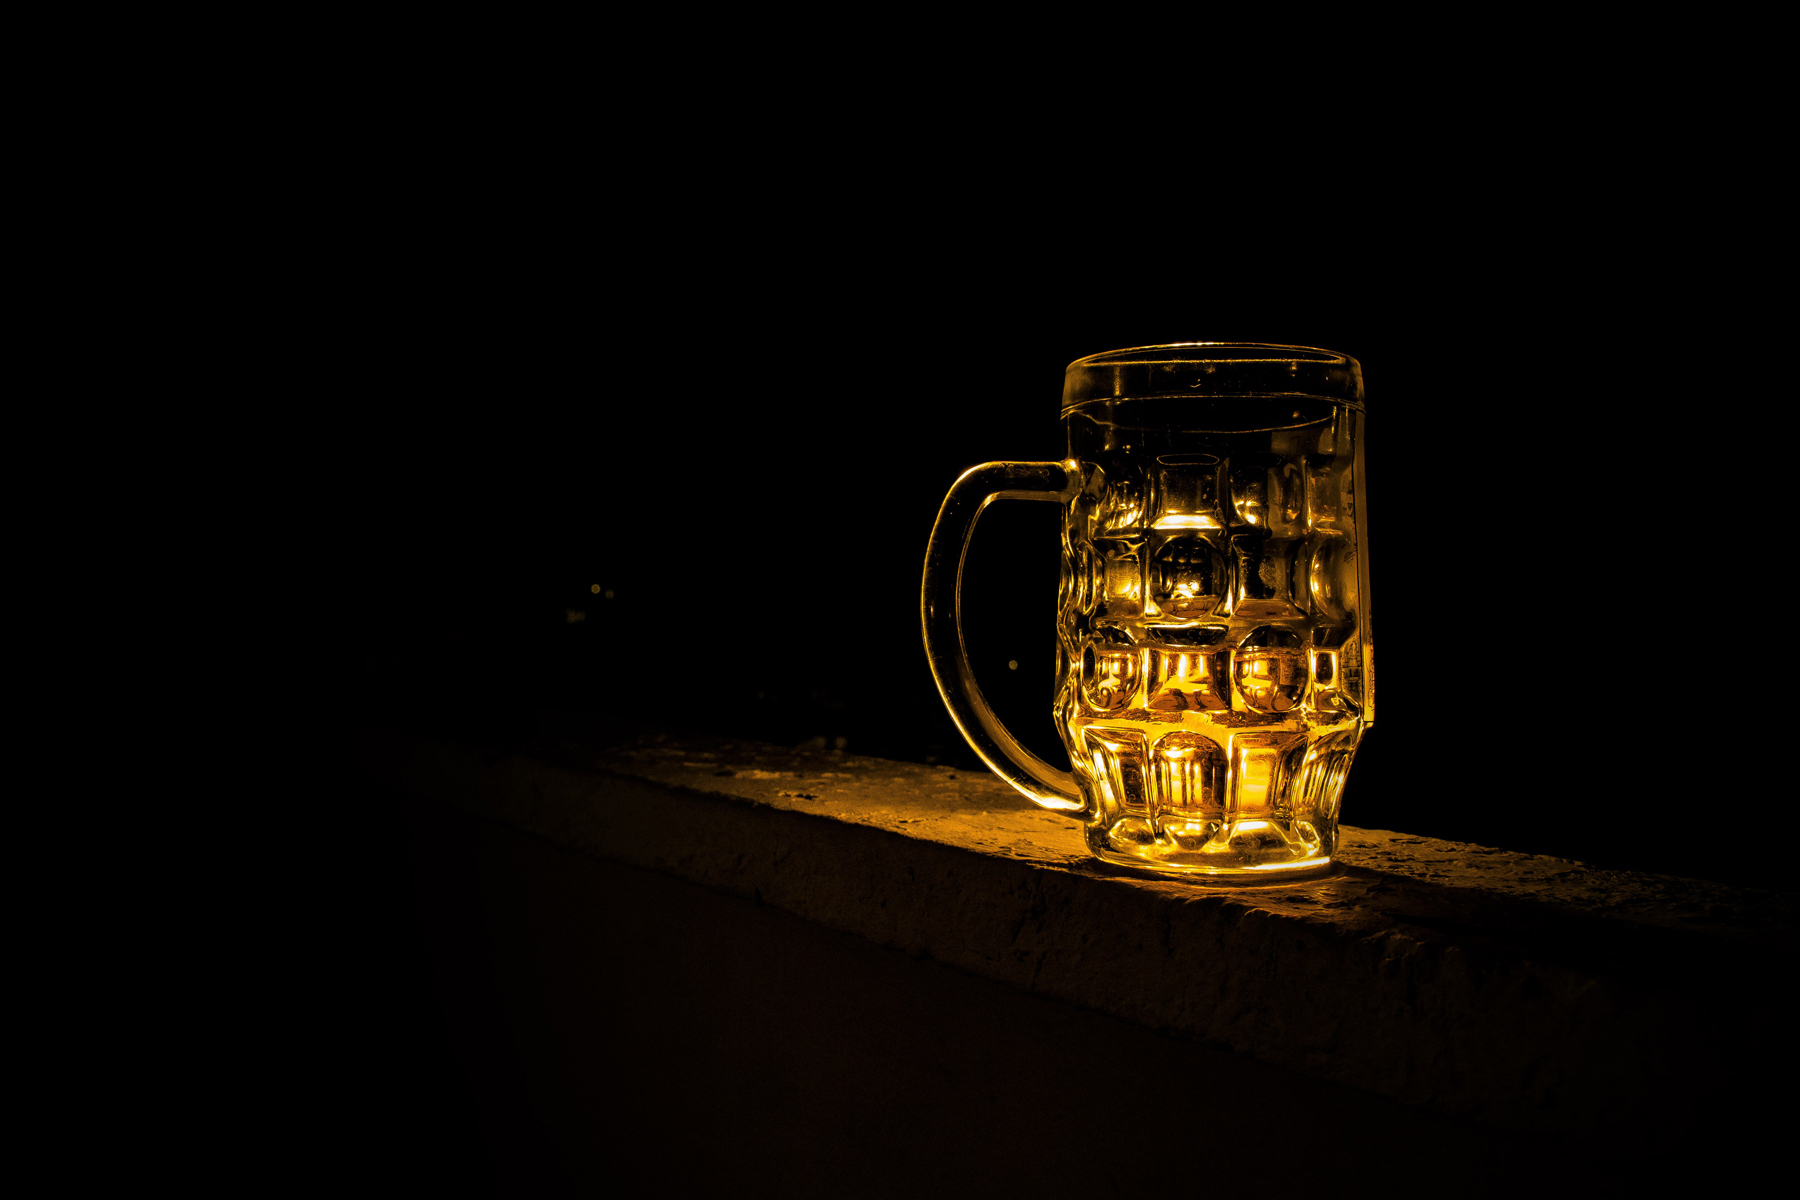 An empty beer glass in a dark room